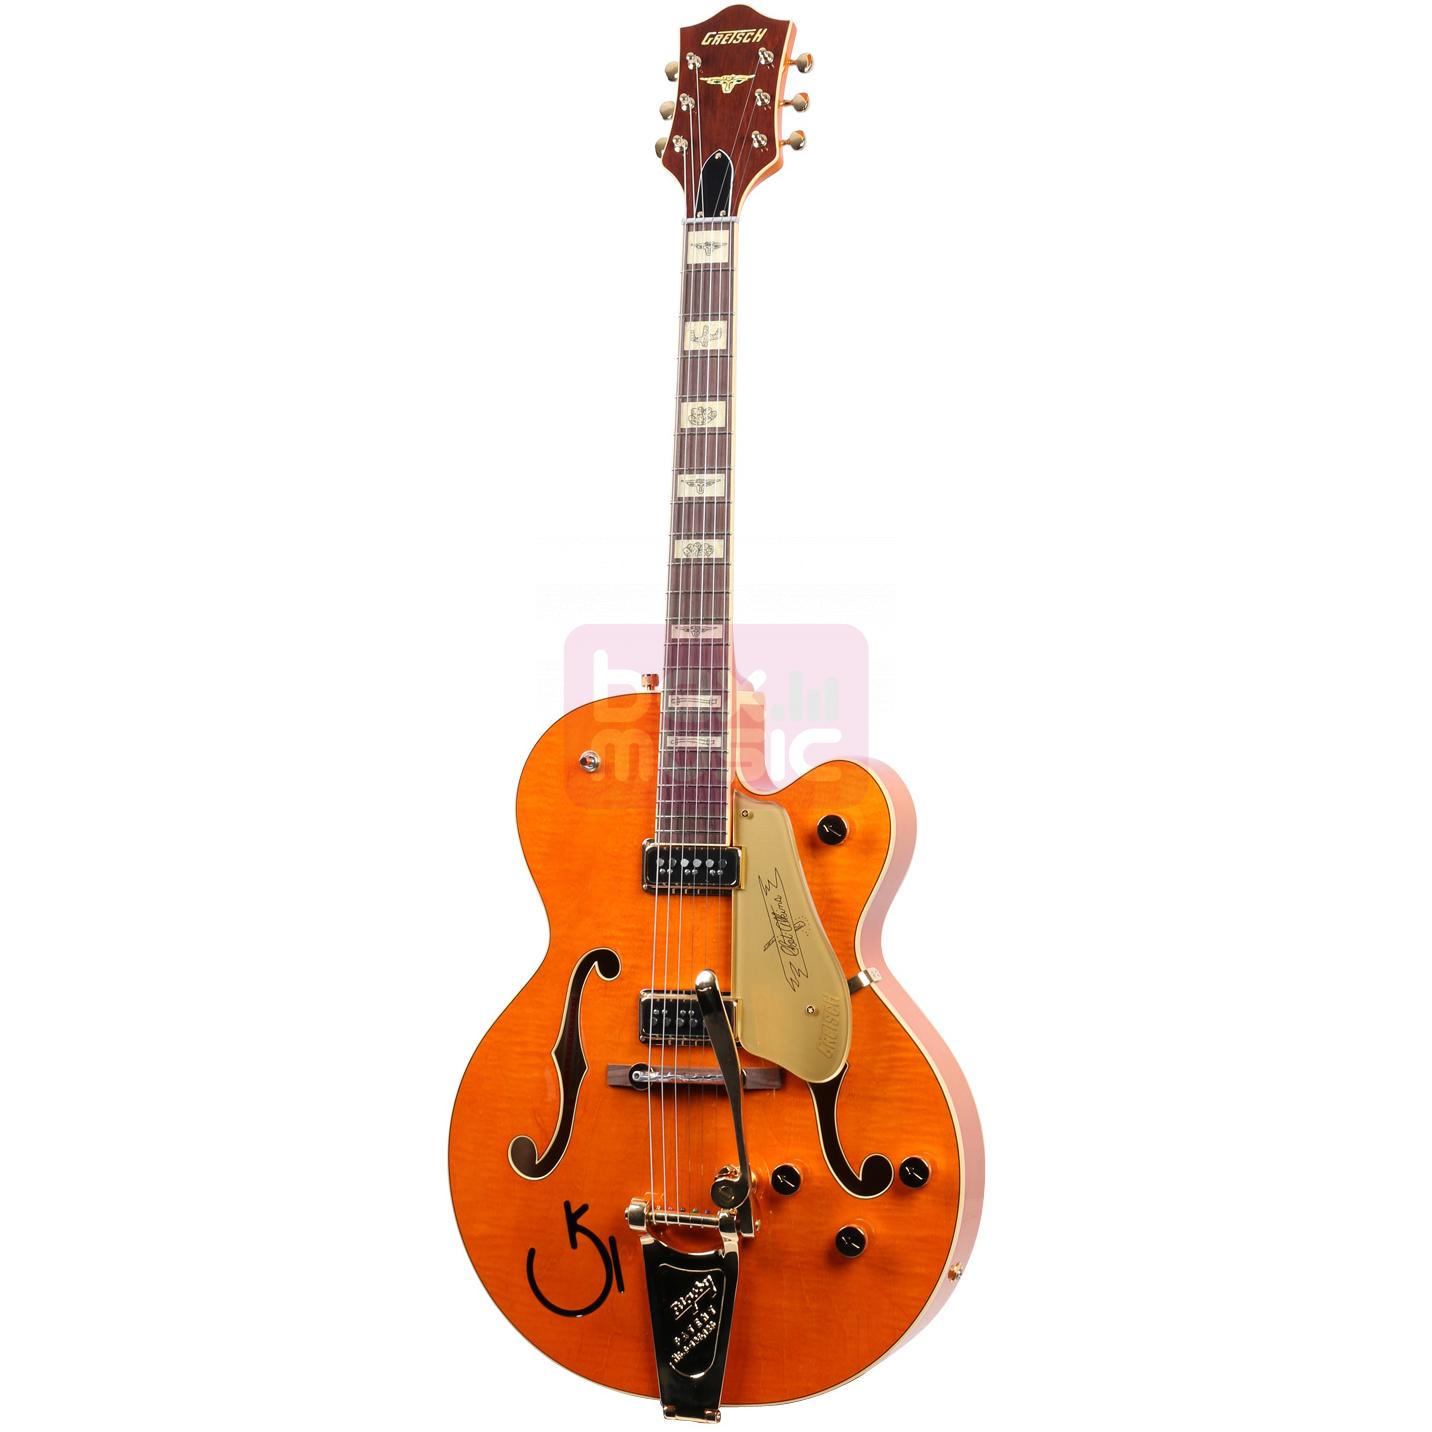 Gretsch G6120T-55 Vintage Select Edition '55 Chet Atkins VOS